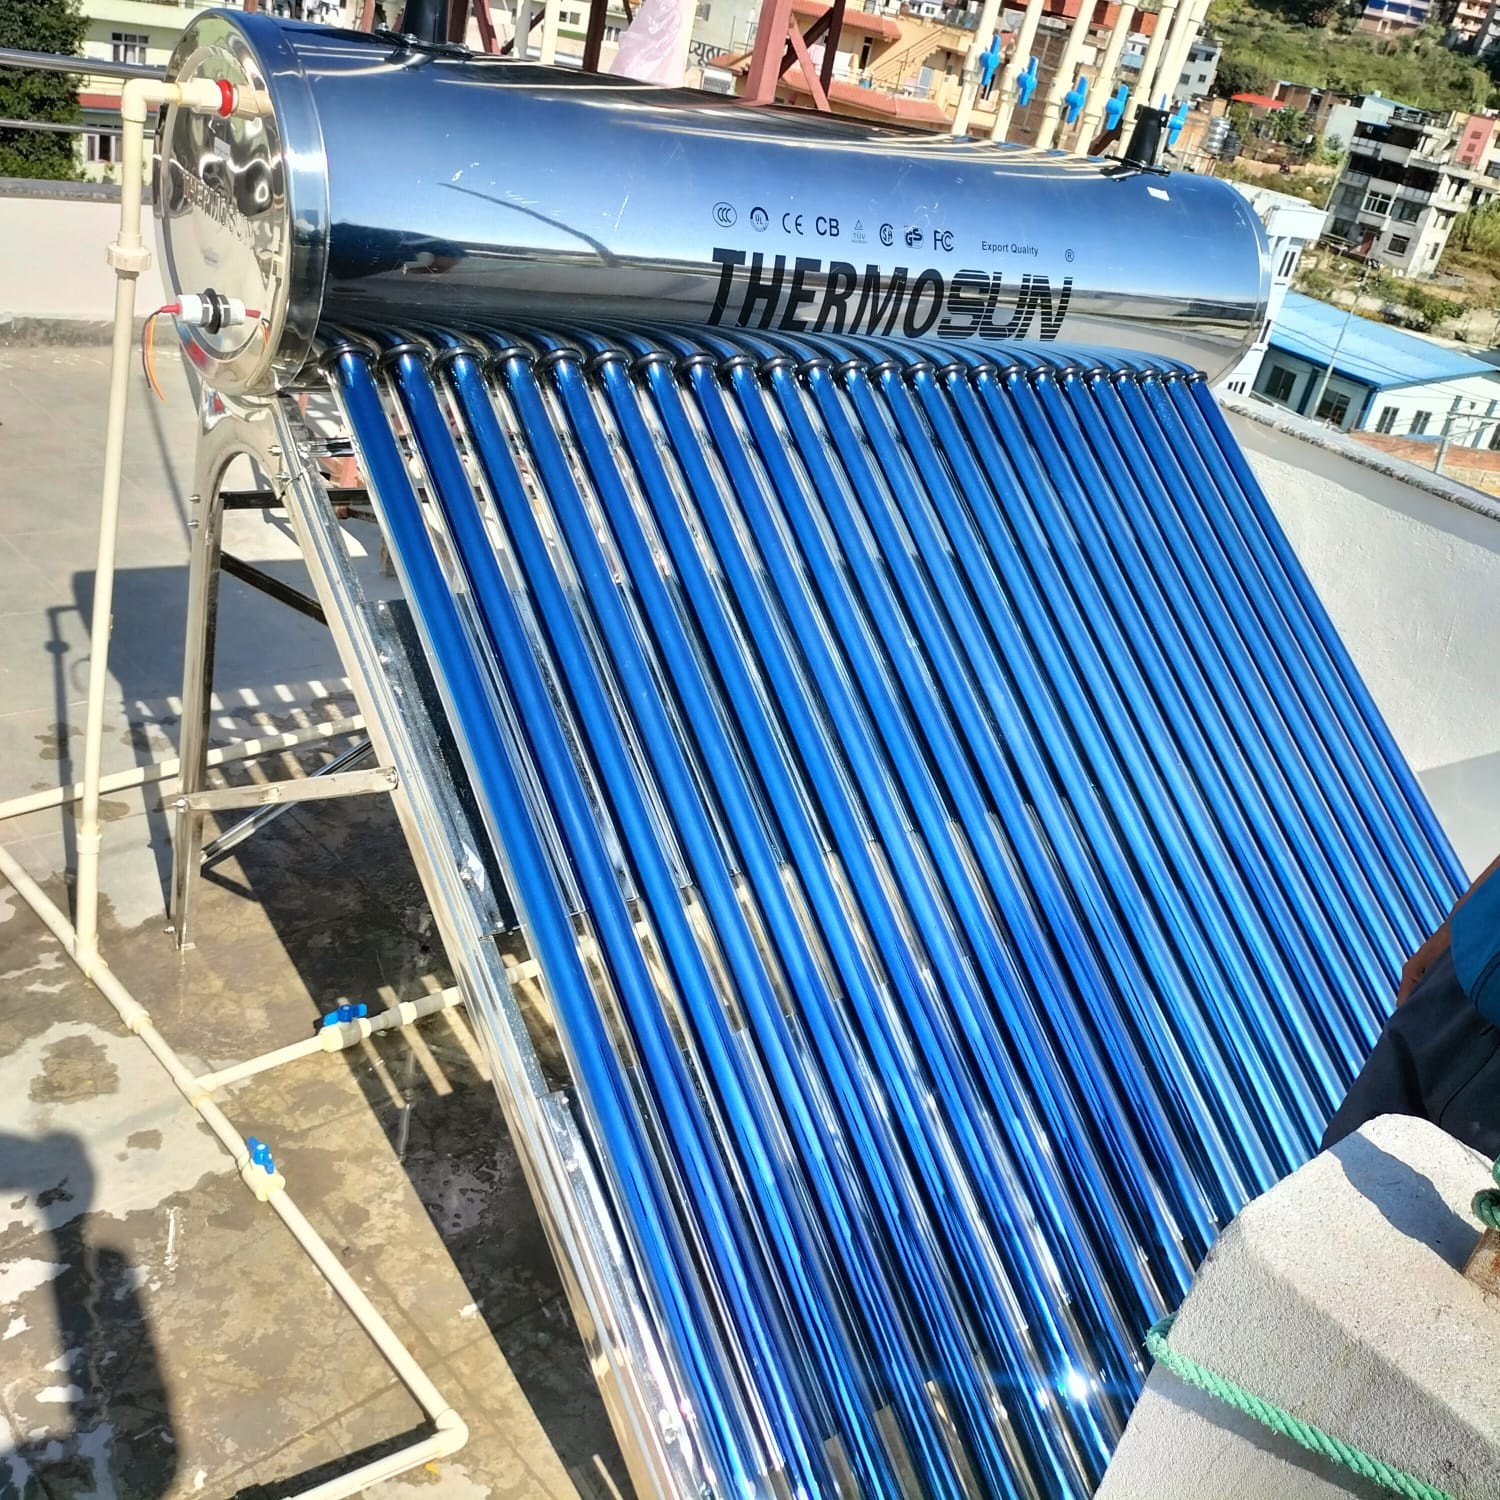 Thermosun Solar Water Heater 20T 250Ltr. -Trade Nepal